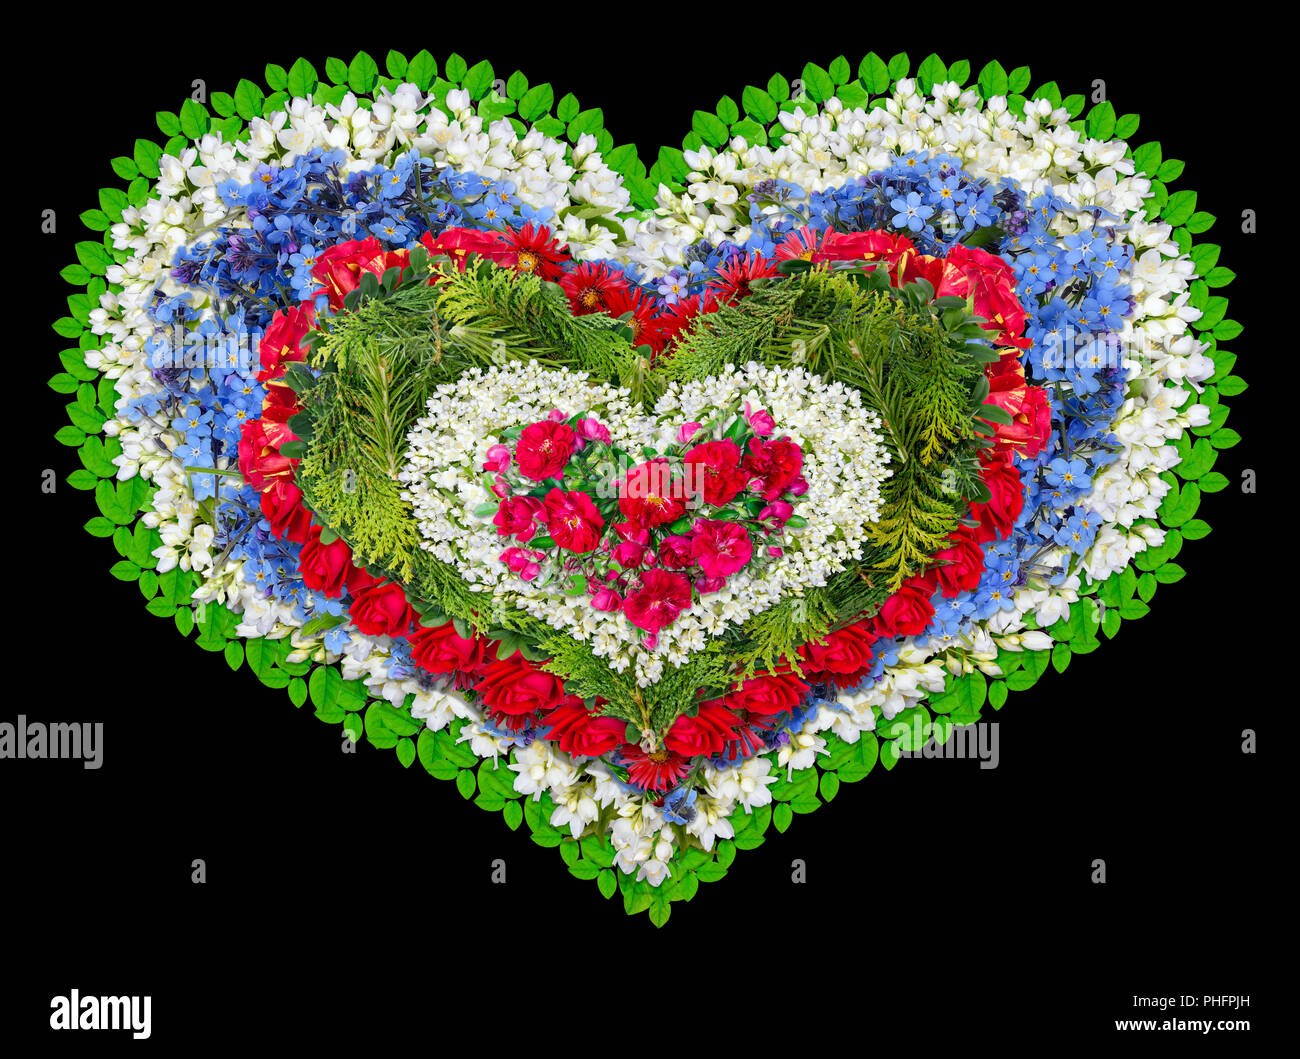 Mourning floral heart Stock Photo